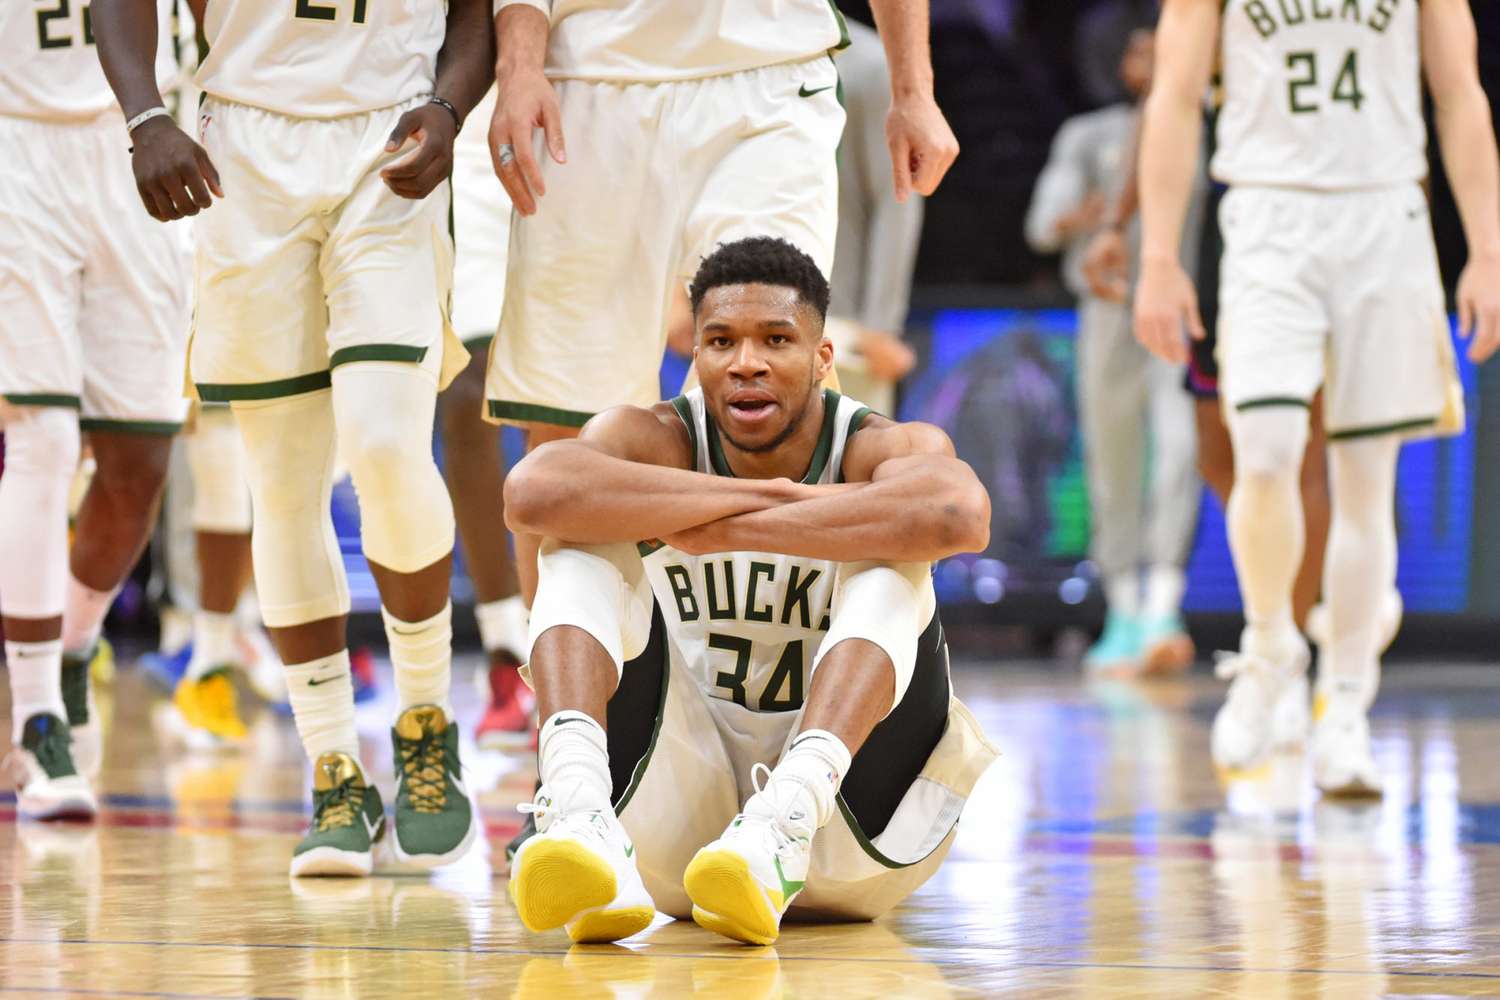 Giannis Antetokounmpo #34 of the Milwaukee Bucks reacts during a game against the Philadelphia 76ers on March 17, 2021